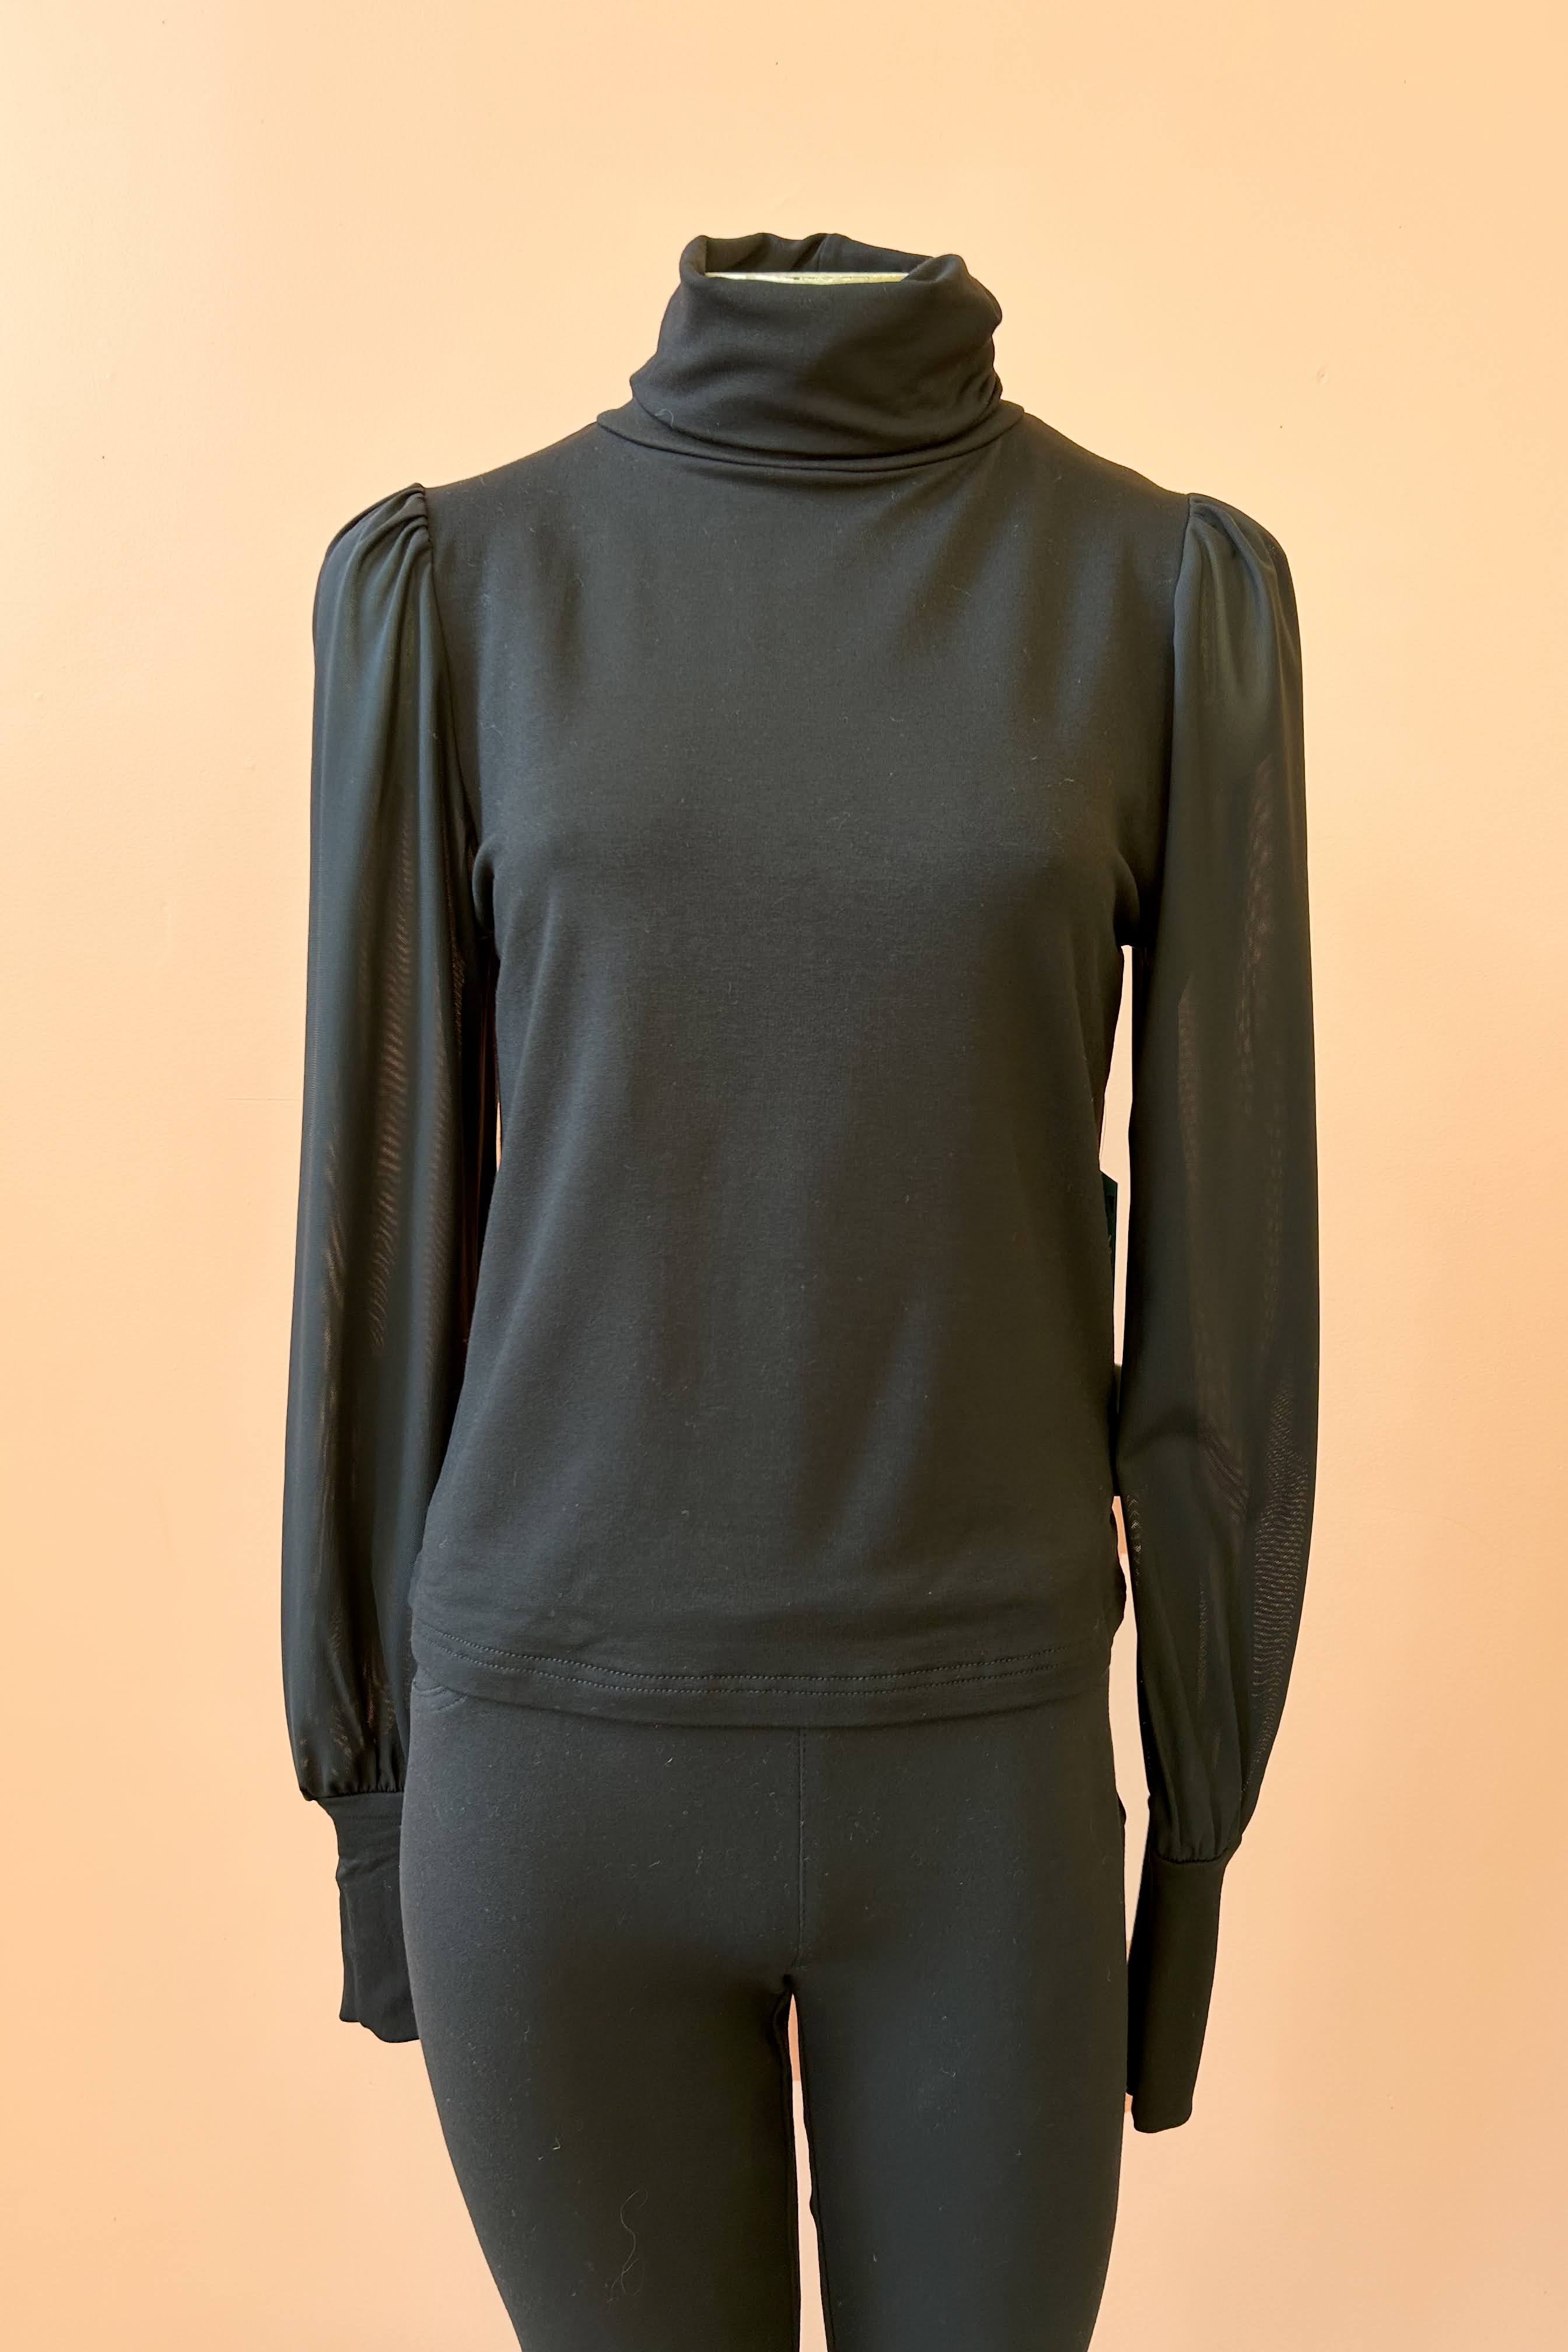 Turtleneck Top by Misstery, Black with Sheer Sleeves, high neck, puffed sleeves with gathered cuffs, sizes S to XL, made in Toronto 